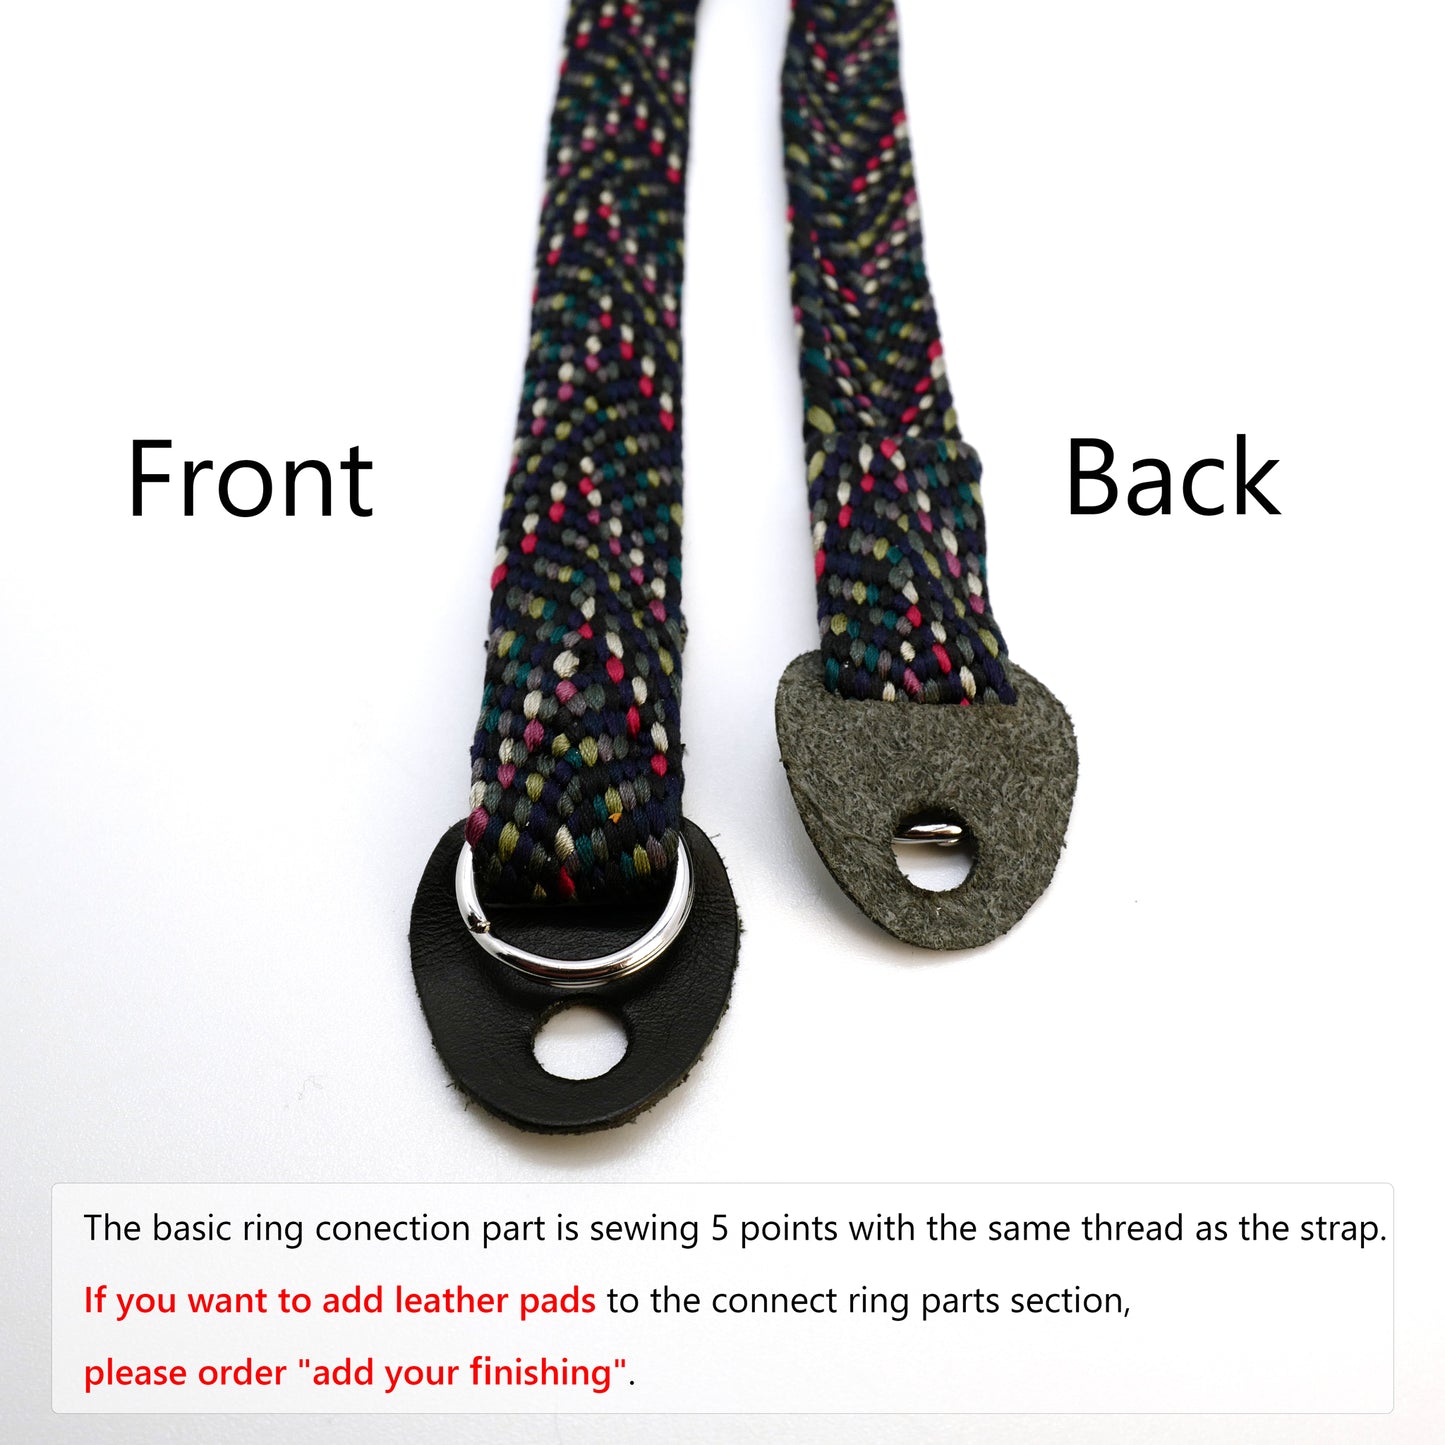 [Made-to-order] Tokyo night camouflage Camera Strap / Hand braiding and Hand-dyed premium Silk Kumihimo/ -130cm